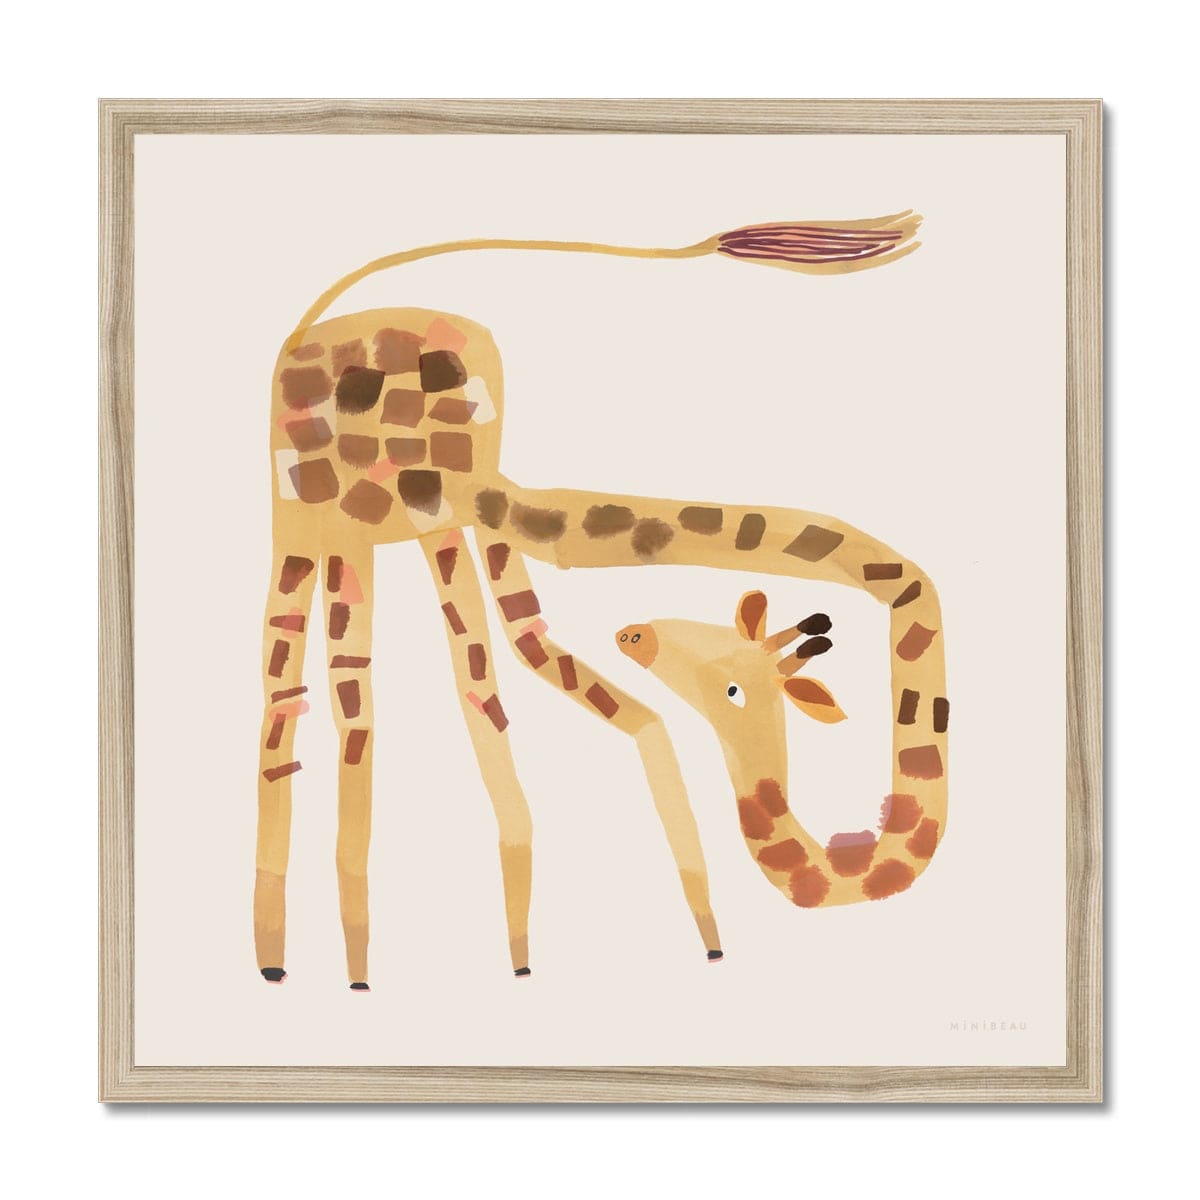 Art print in a natural wood frame. Our square Giraffe art print shows a cartoon giraffe with it's tail in the air and it's bending neck looking round its shoulders on a neutral background.